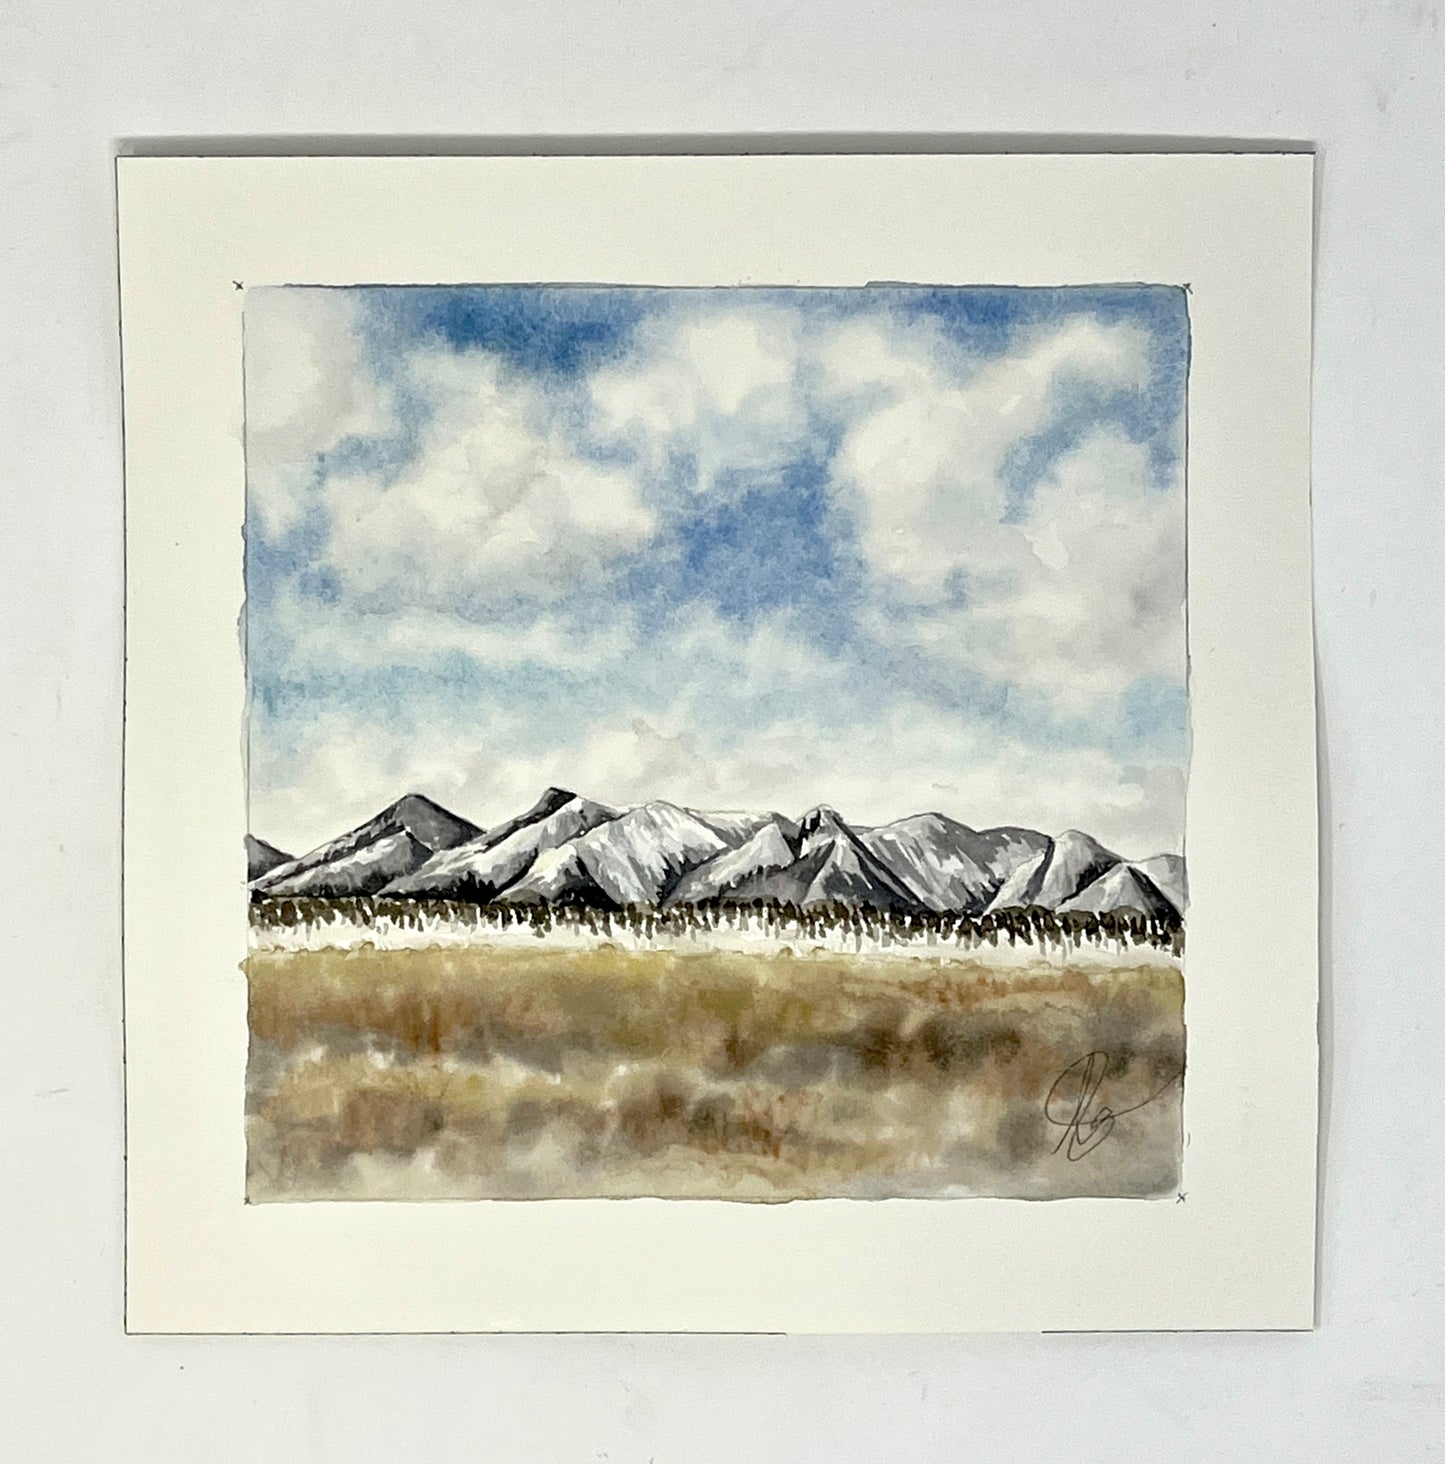 Natalie Connell: Watercolor 9 x 9 inches (unframed)